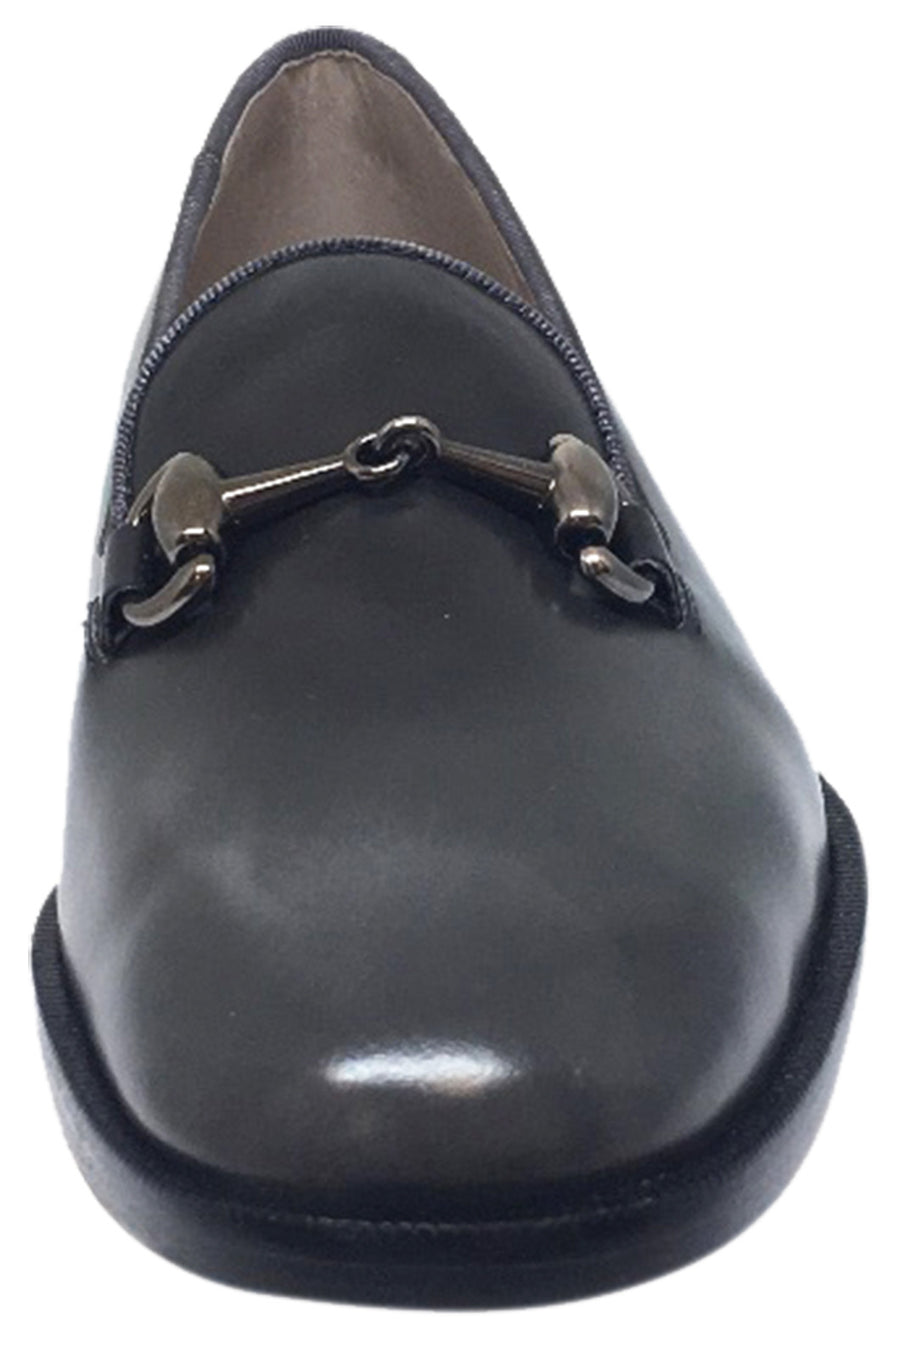 Hoo Shoes Boy's Eric's Smooth Leather High Shine Slip On Upper Detail Oxford Loafer Shoe